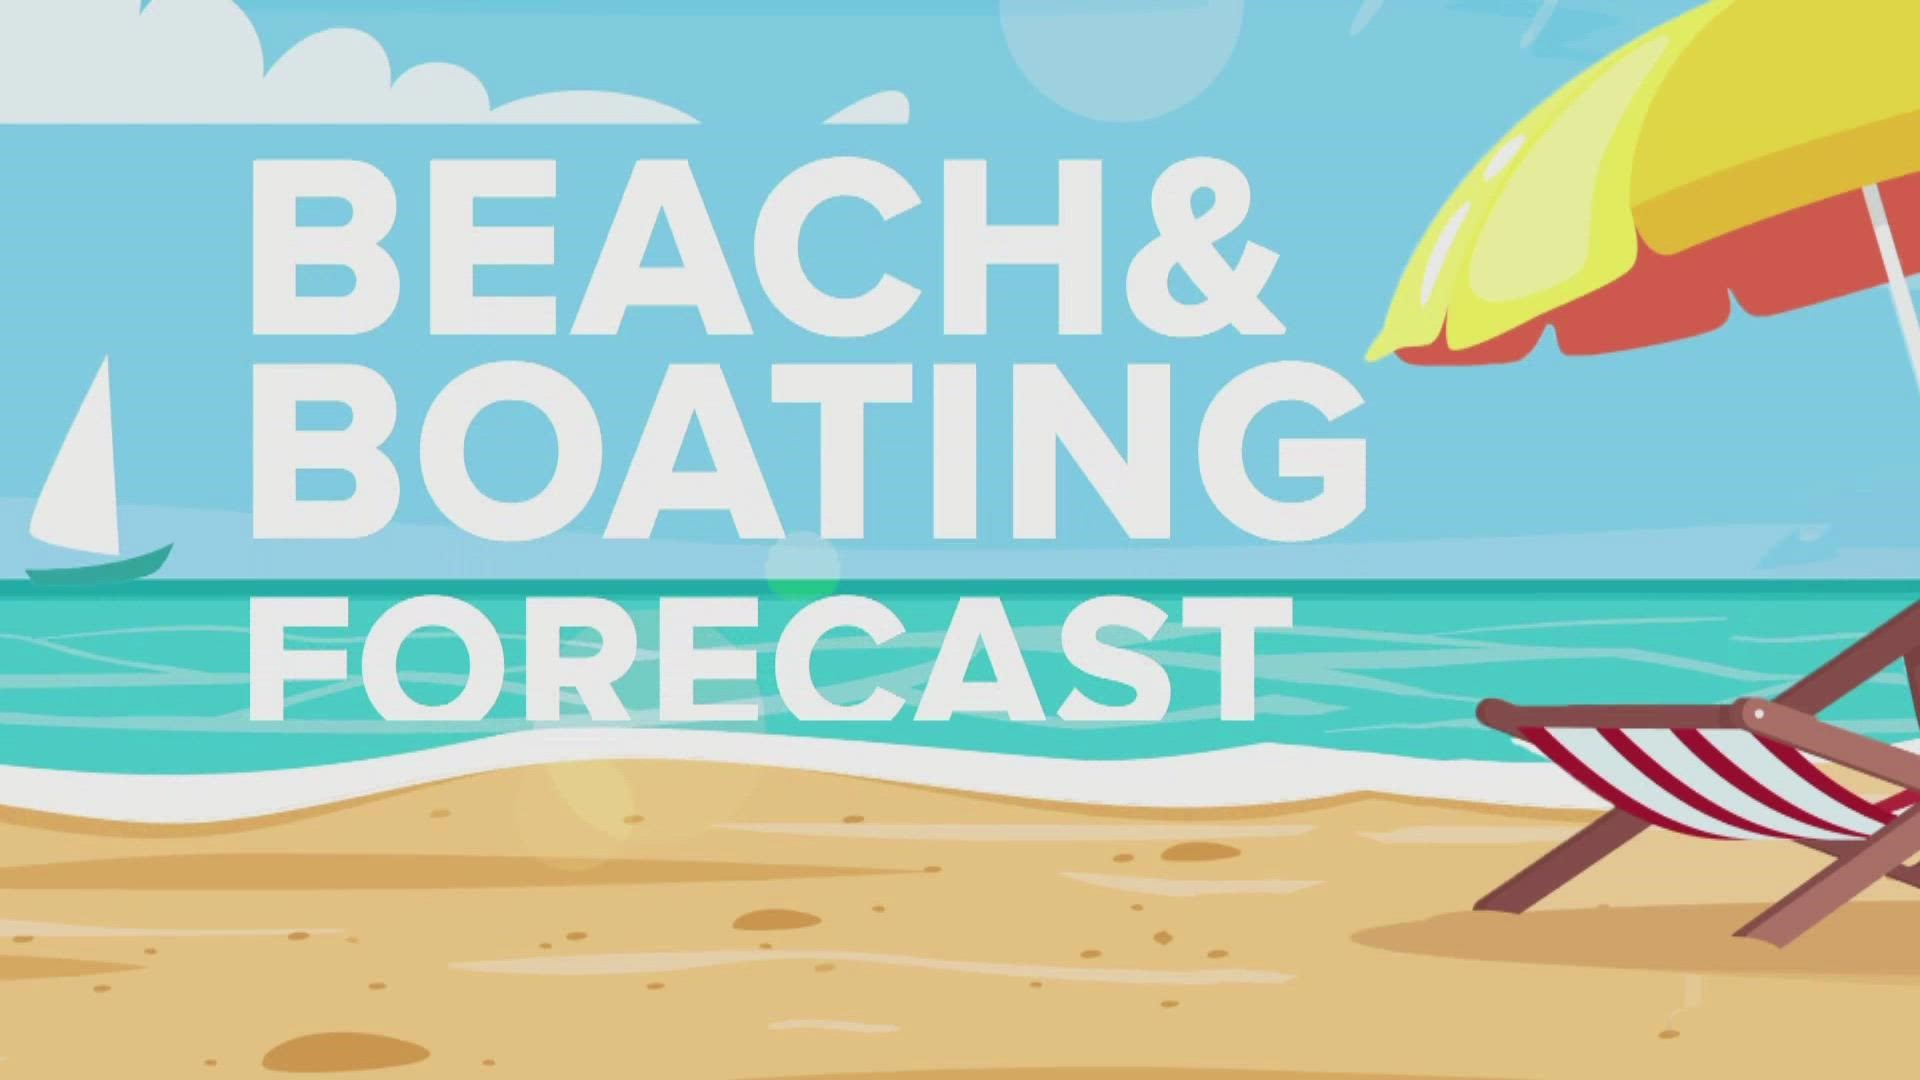 Here's the latest beach and boating forecast with Meteorologist Michael Behrens!